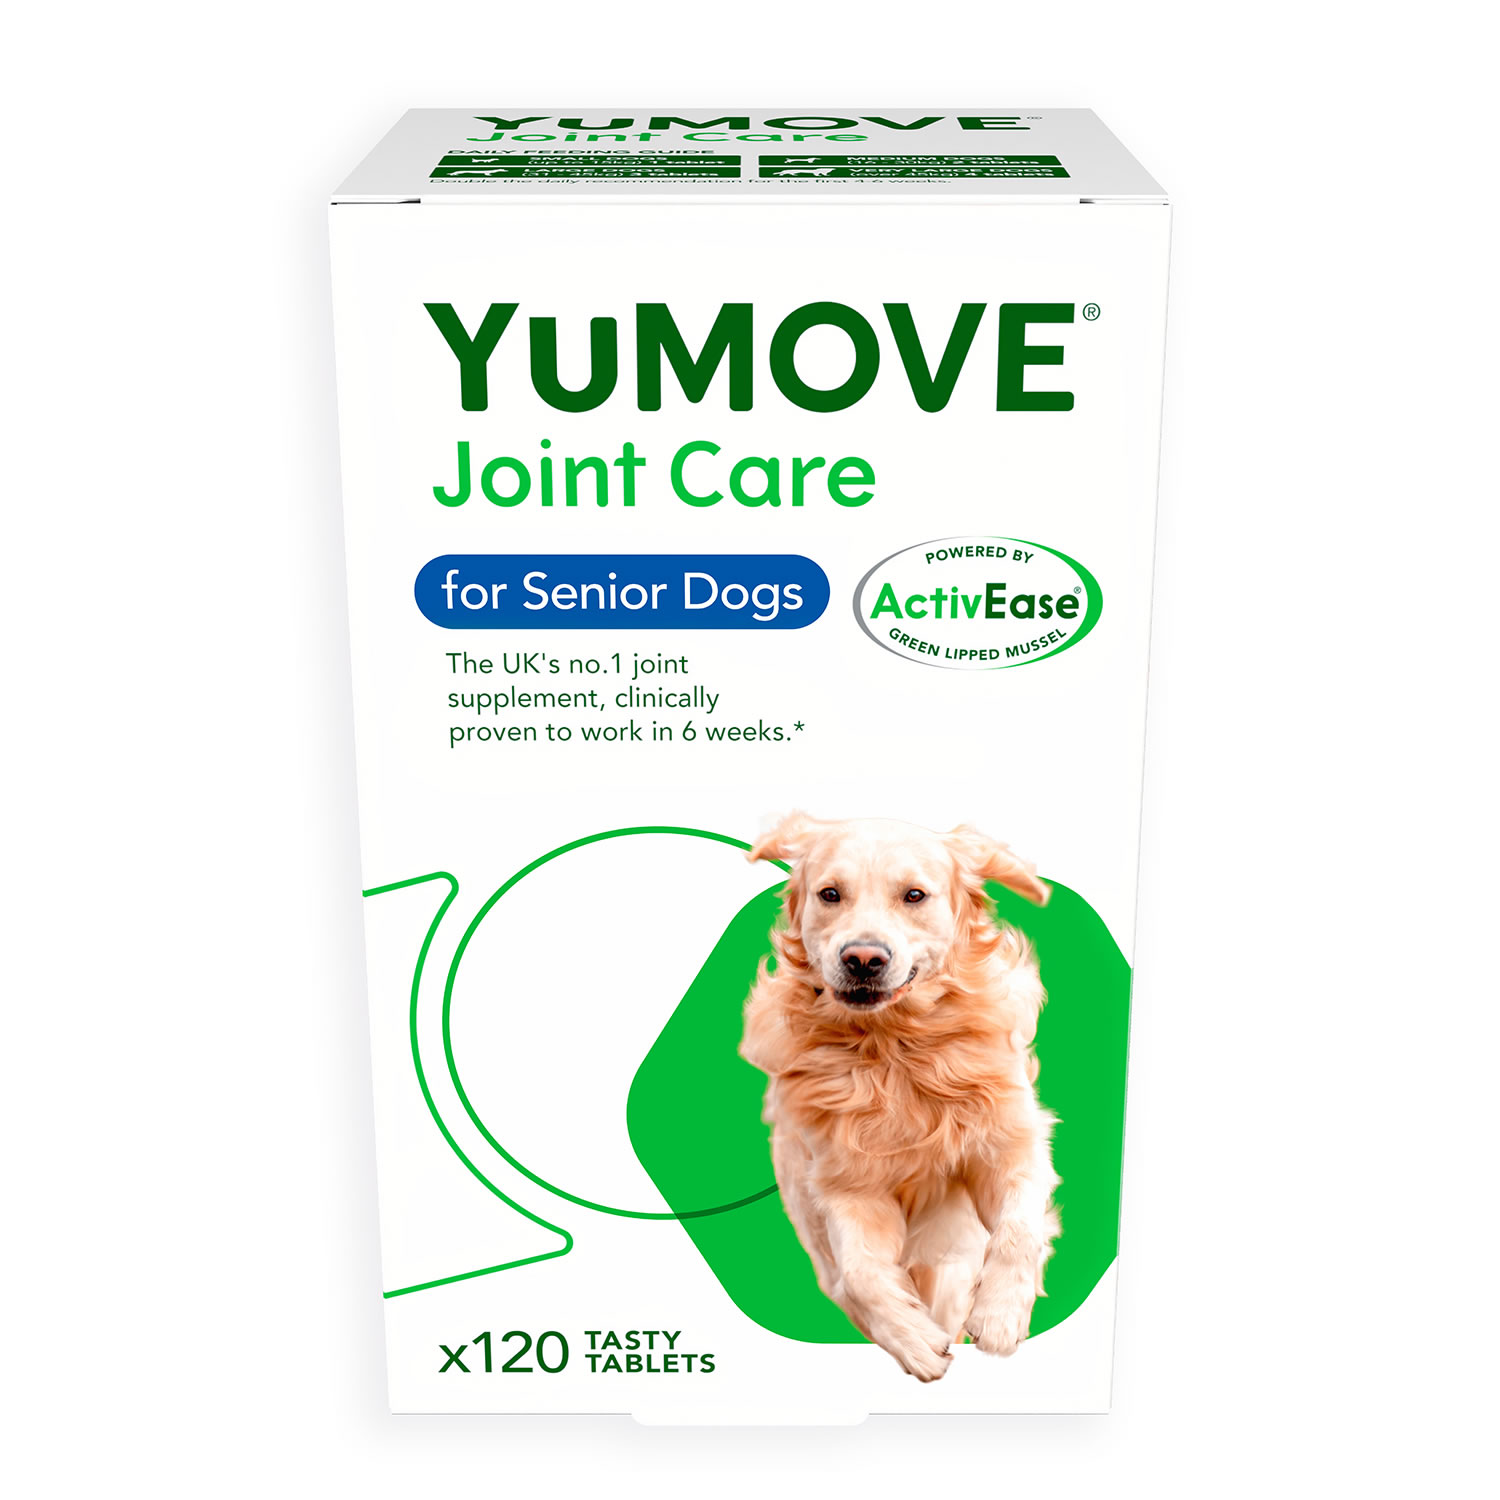 YUMOVE JOINT CARE FOR SENIOR DOGS